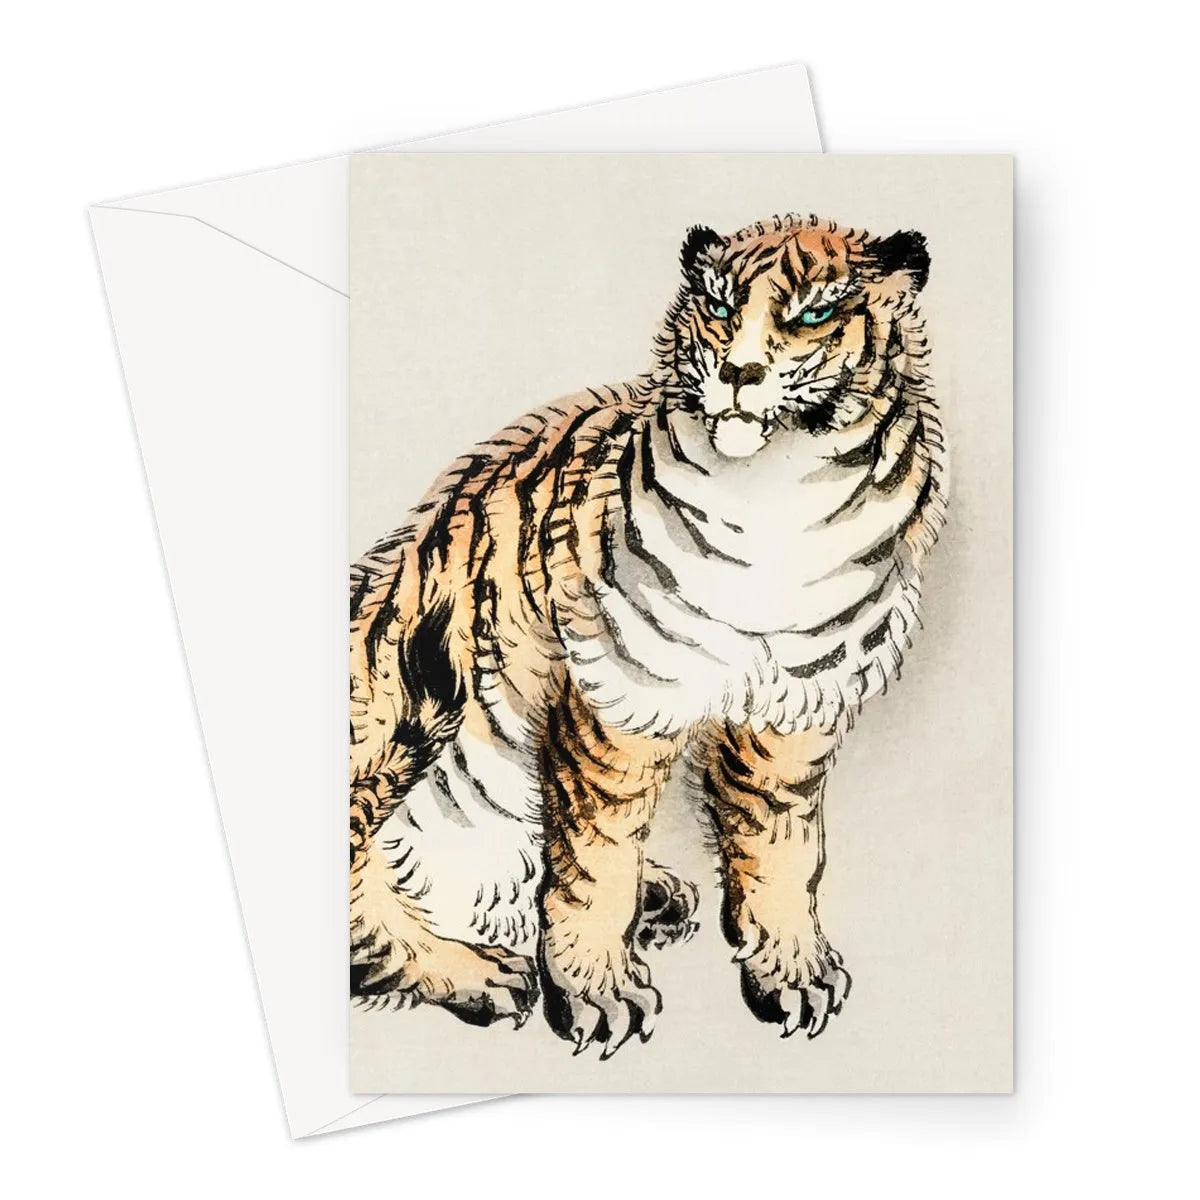 Tiger By Kōno Bairei Greeting Card - A5 Portrait / 1 Card - Greeting & Note Cards - Aesthetic Art